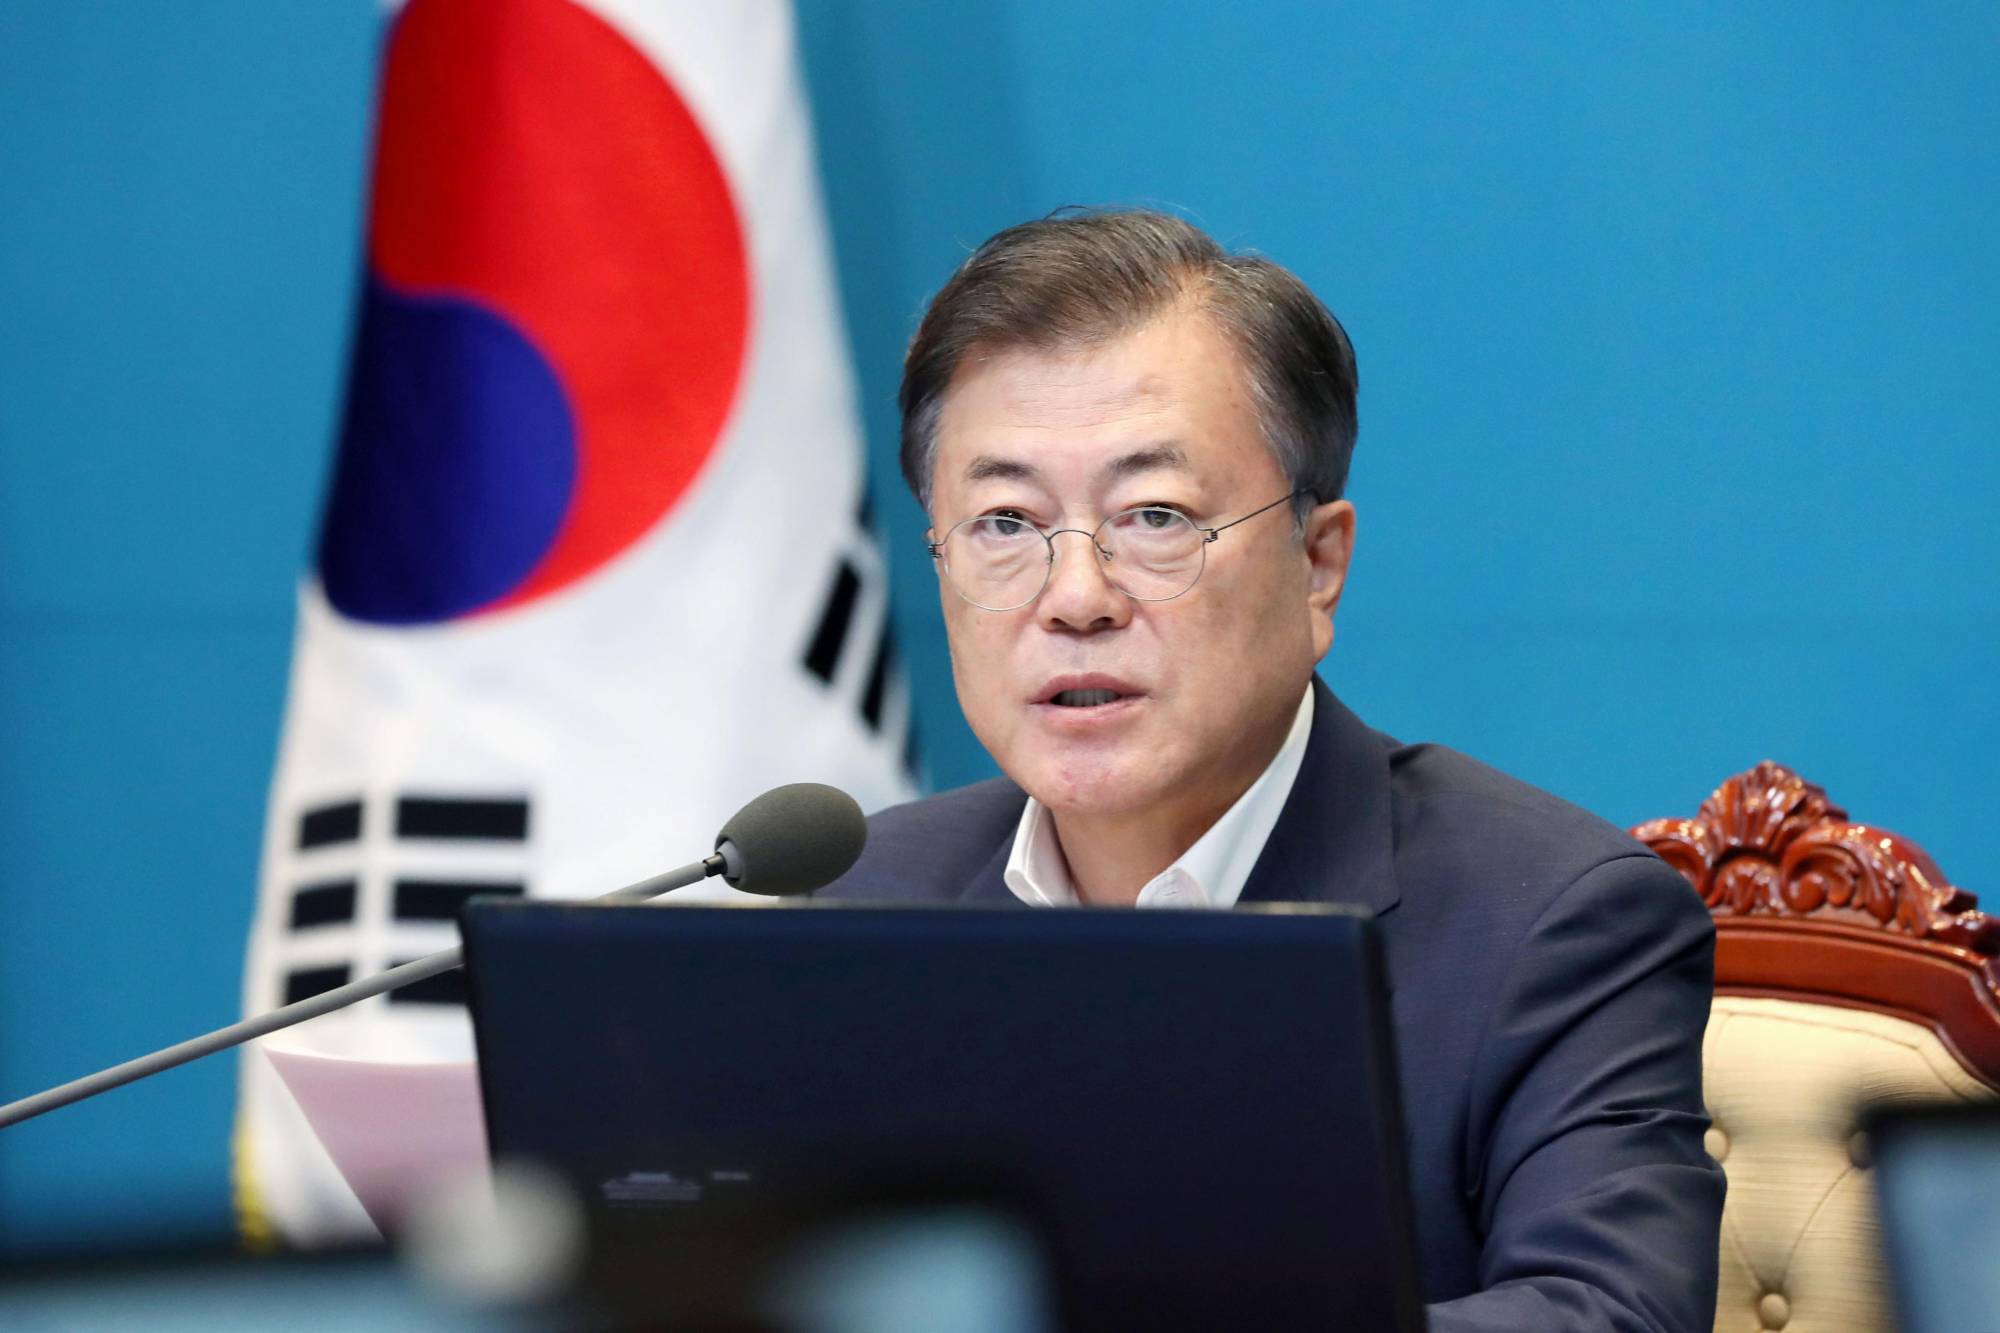 Moon Jae-in to focus on victims in 'comfort women' row with Japan - The ...